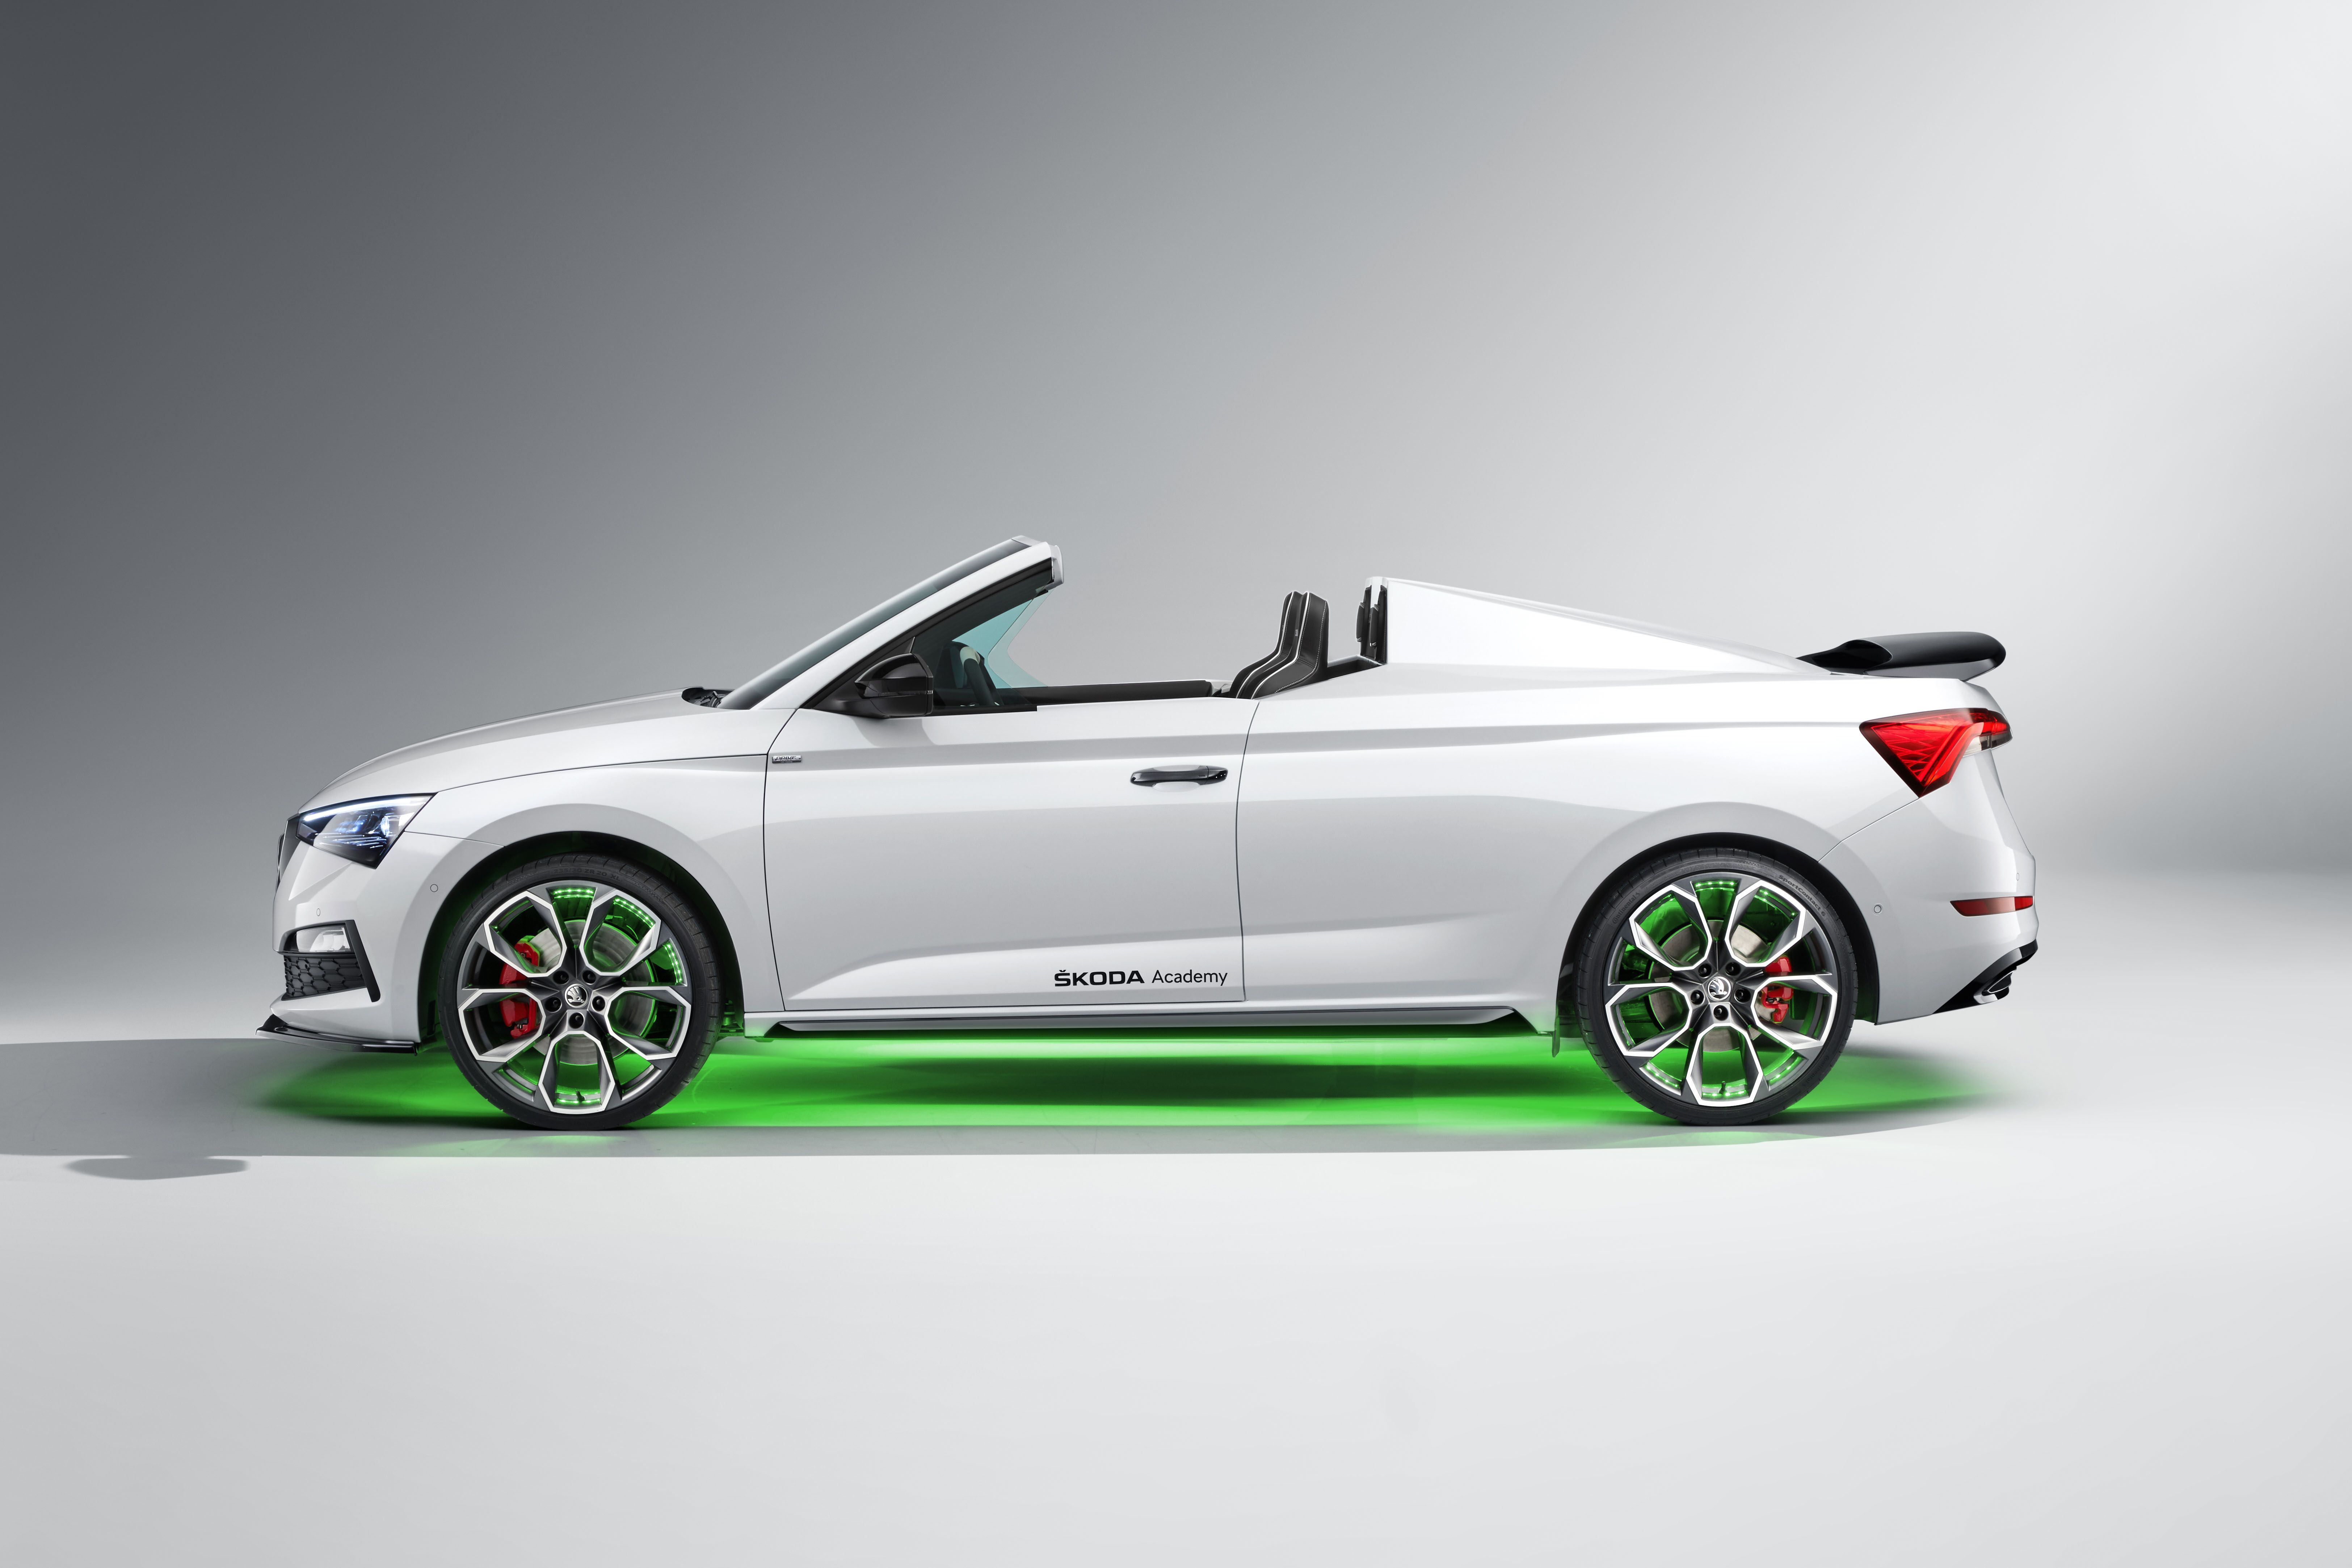 2020 Skoda Slavia Concept - One Affordable Roadster We'd Love to See Come to Life